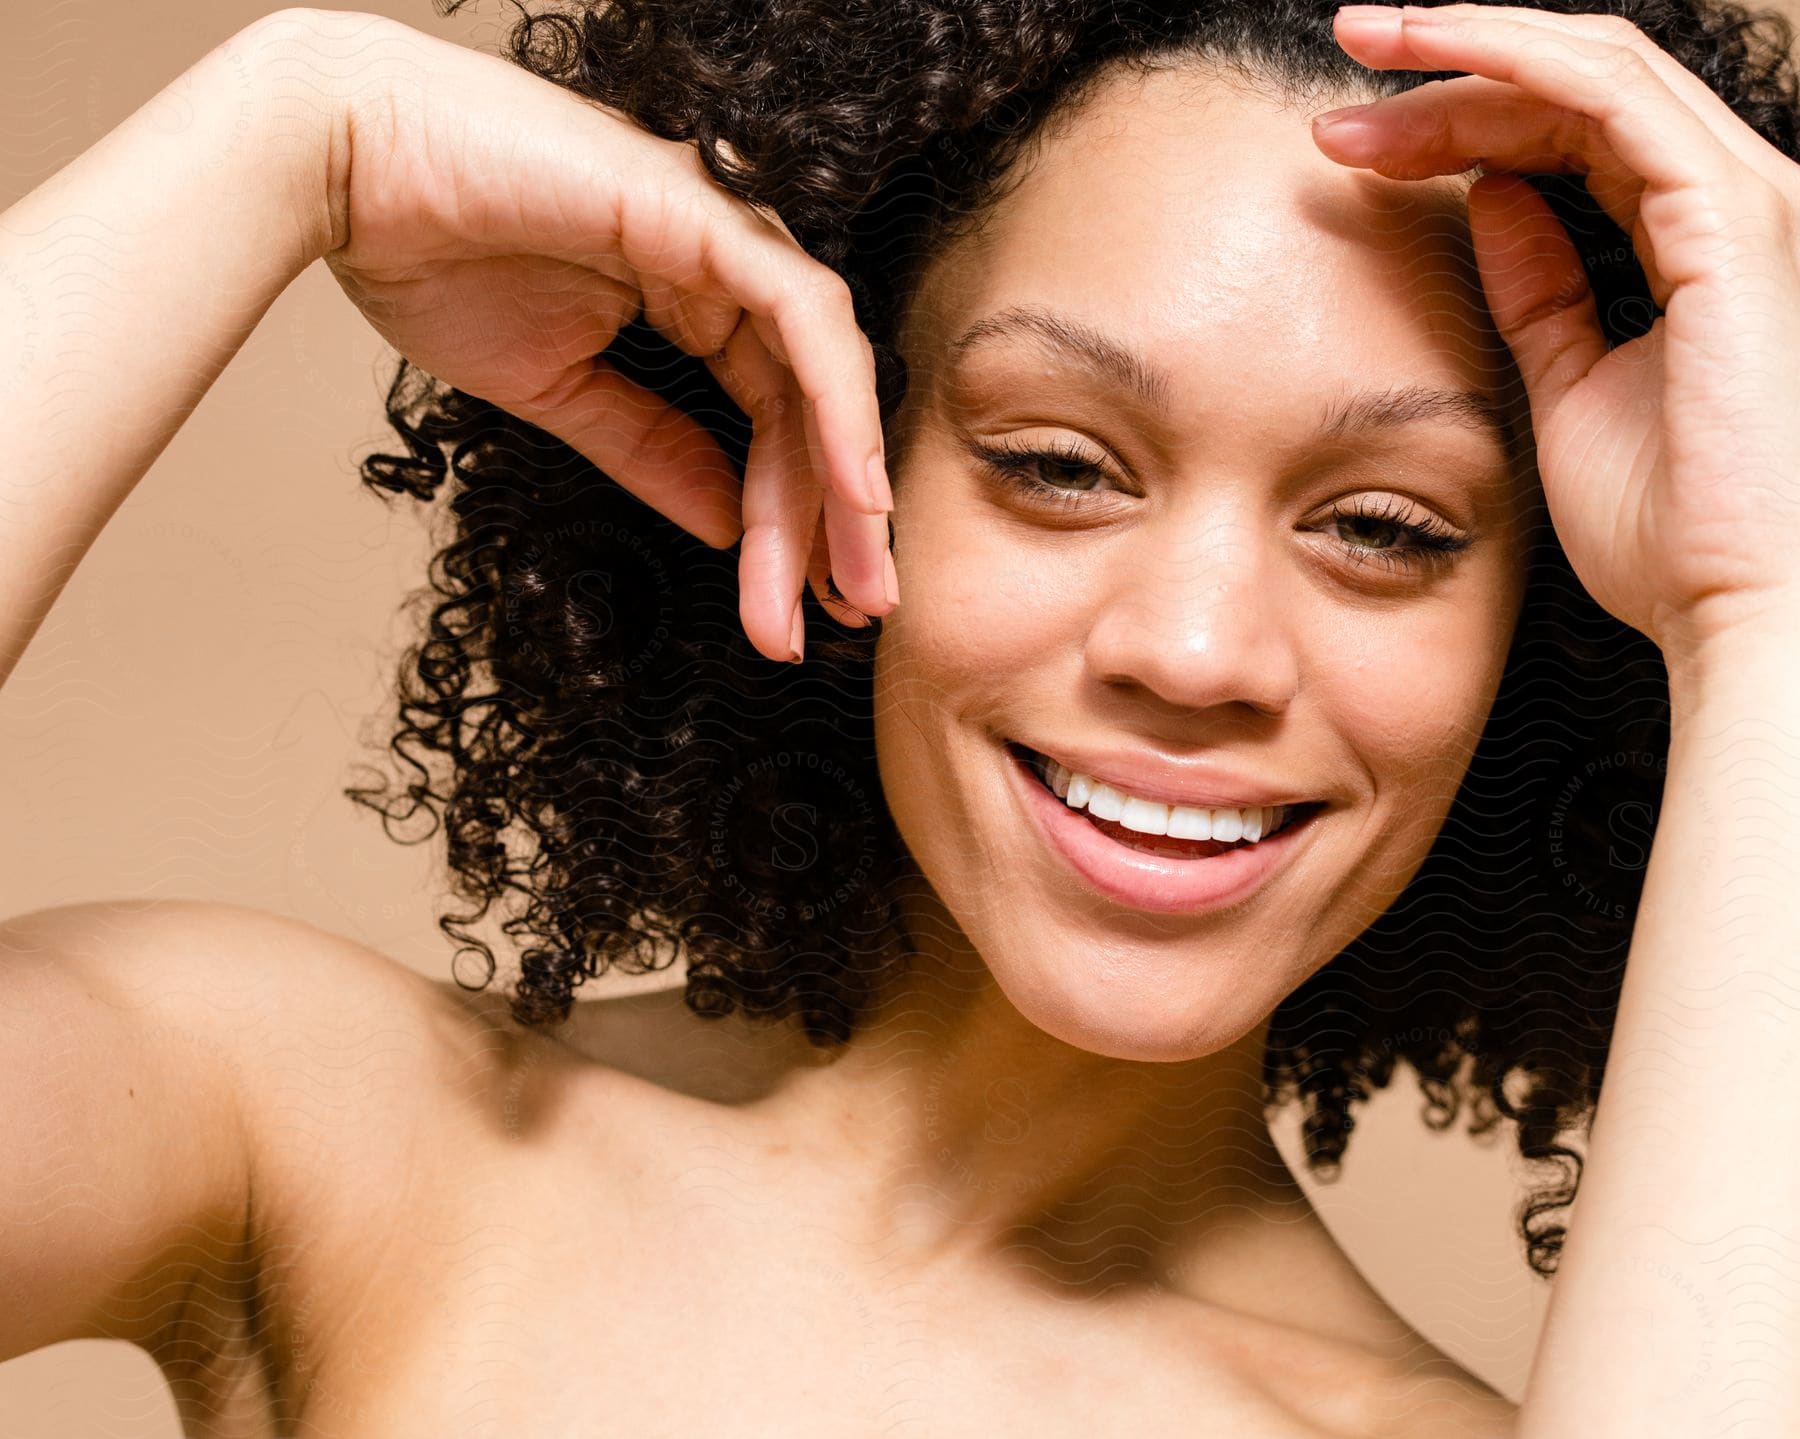 Portrait of a half-naked smiling young woman with her black curly hair